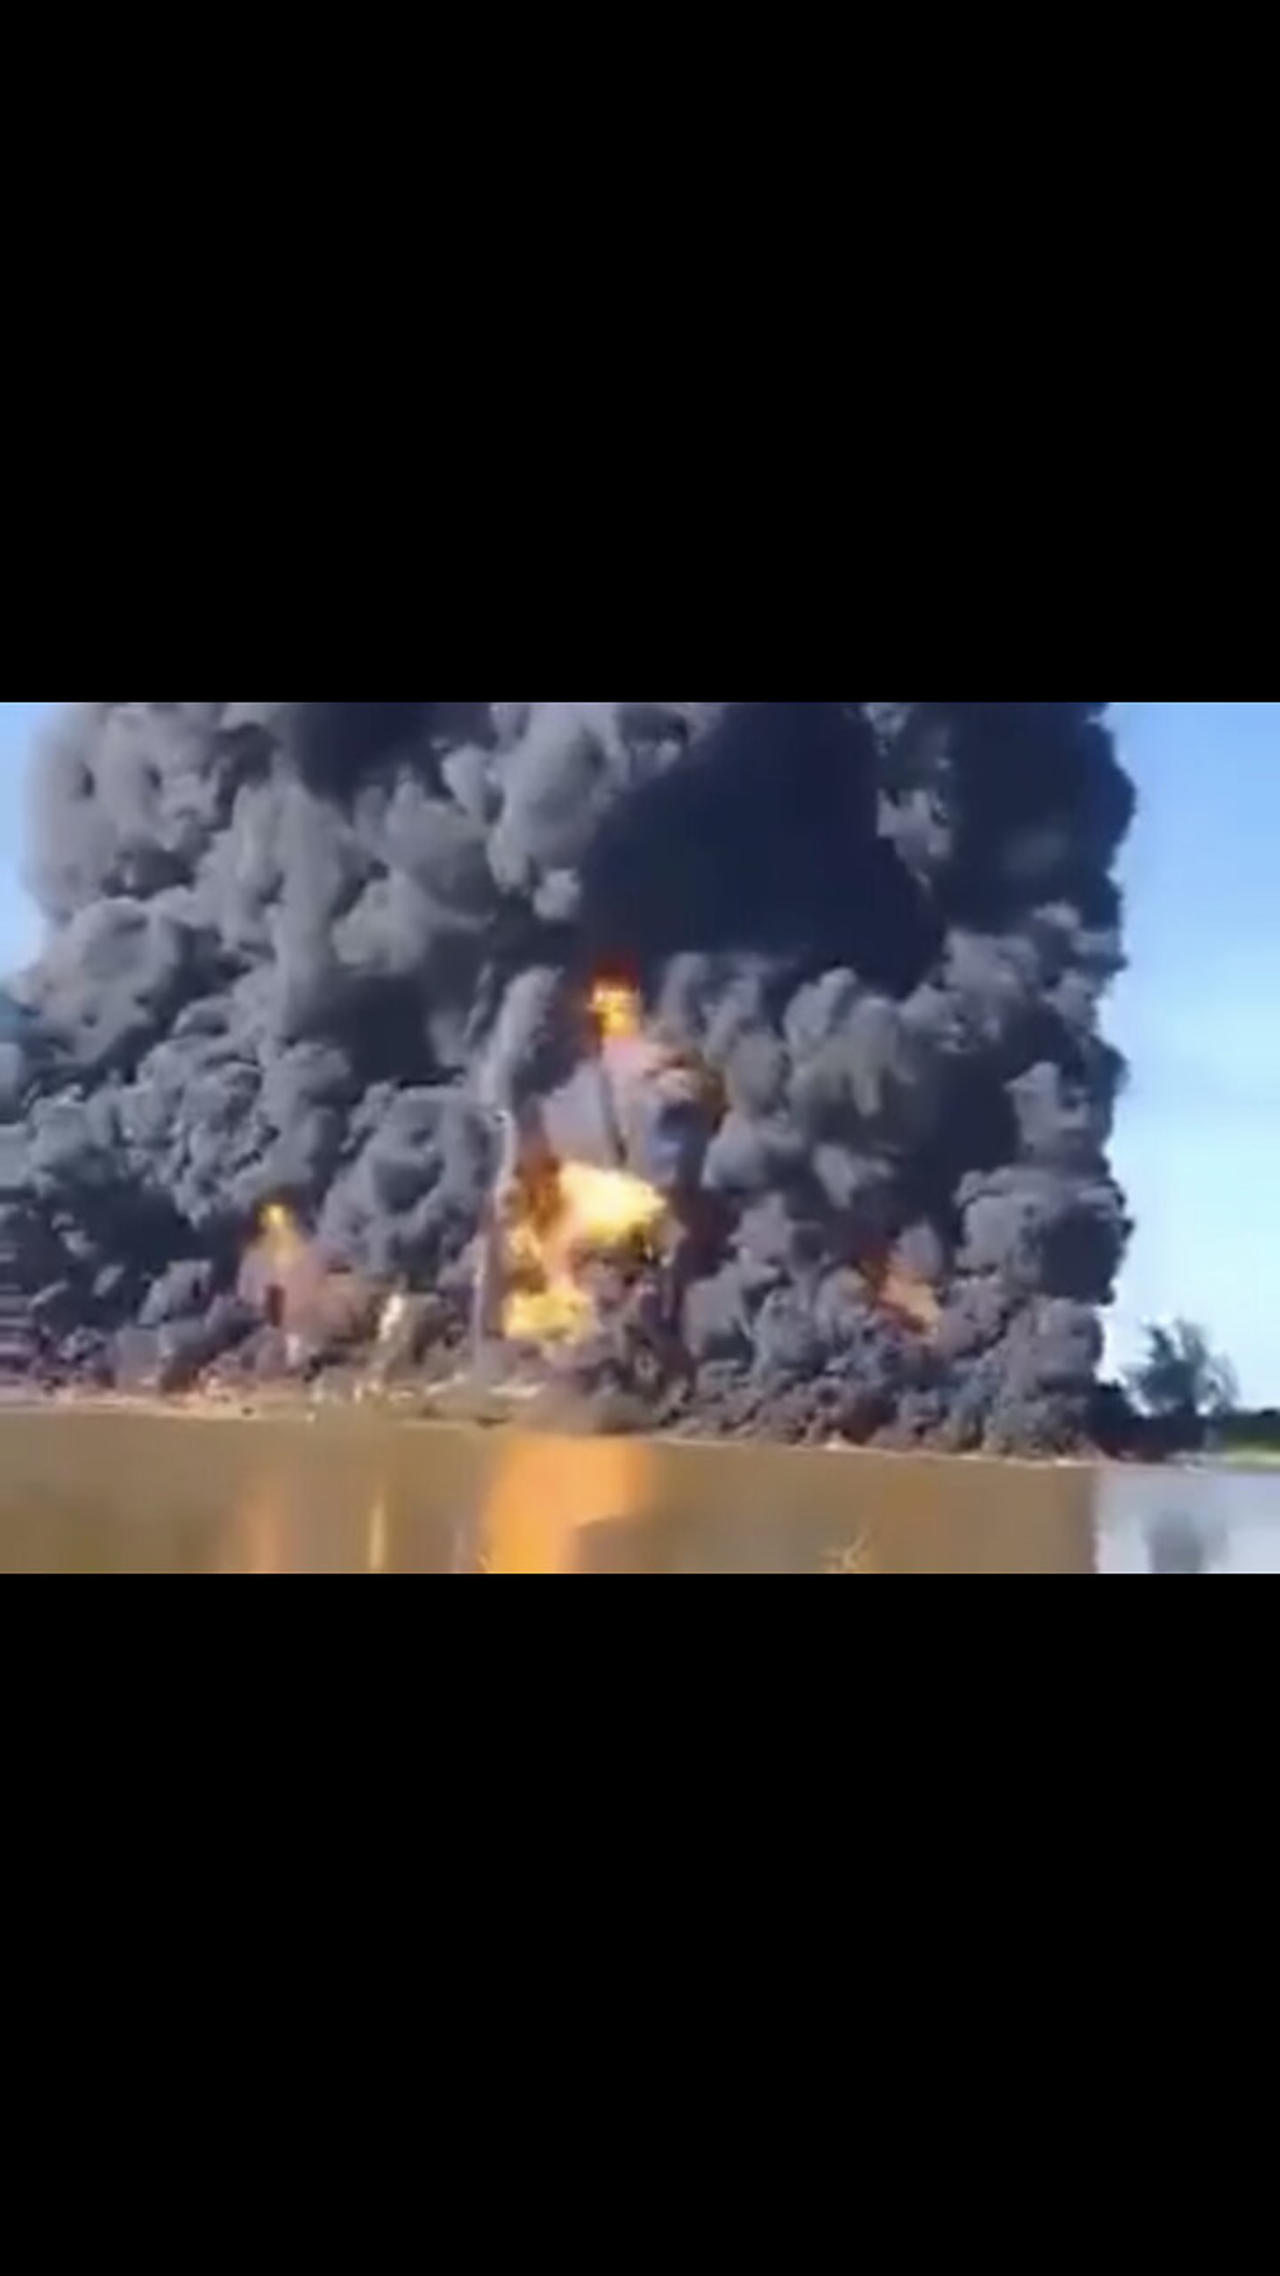 3 MASSIVE CRUDE OIL FIRES IN 1 DAY • ALL OWNED BY THE SAME COMPANY